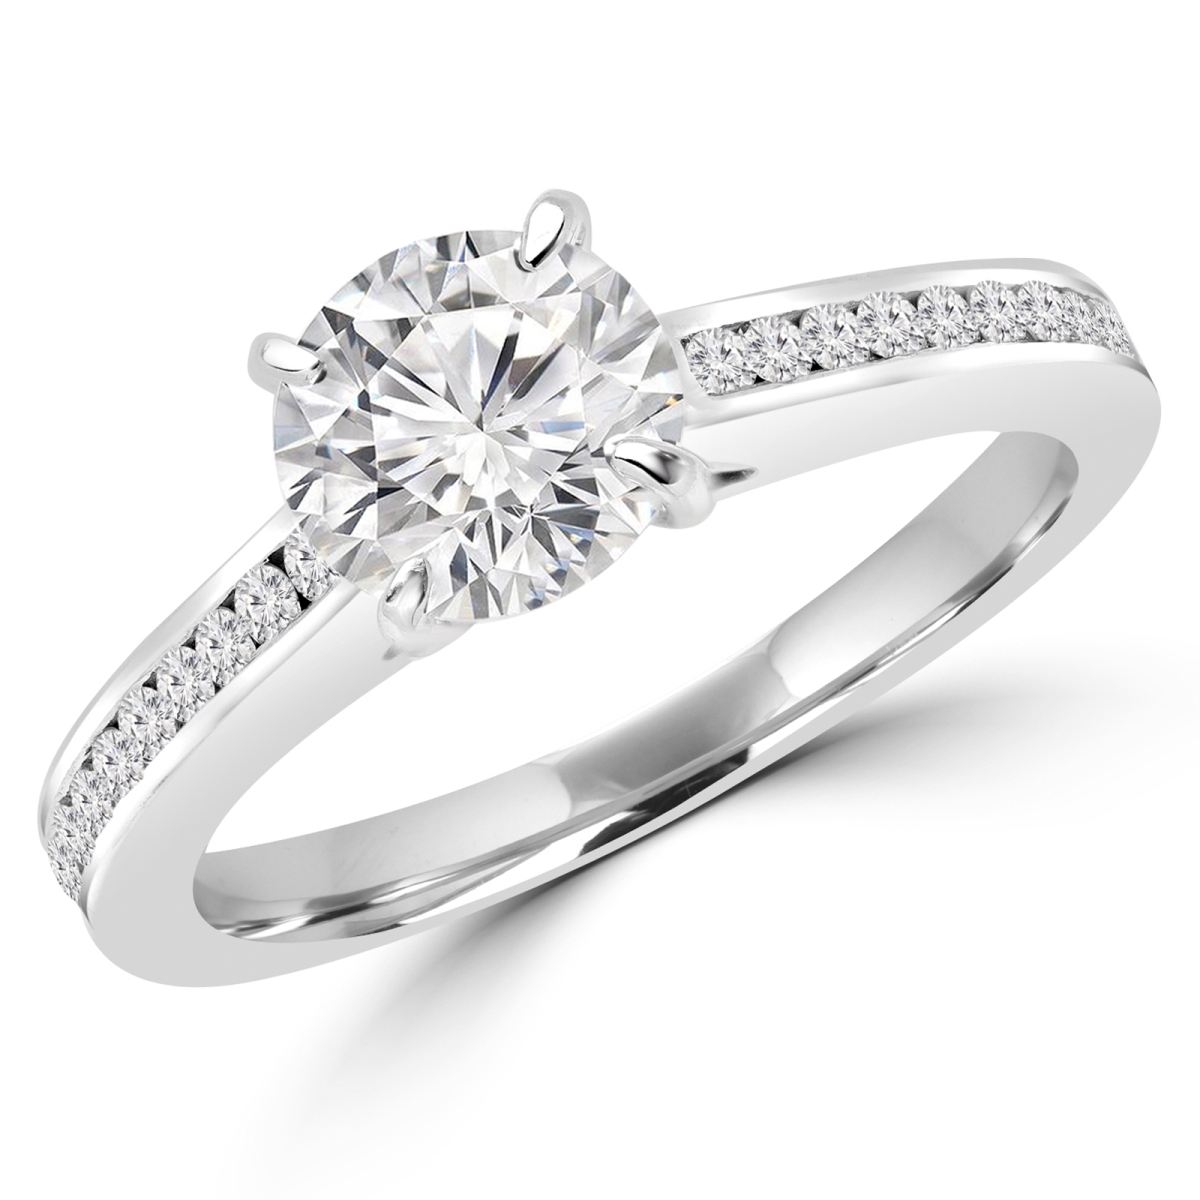 MD180237-6.5 0.6 CTW Round Diamond Solitaire with Accents Engagement Ring in 14K White Gold with Channel Set Accents - Size 6.5 -  Majesty Diamonds